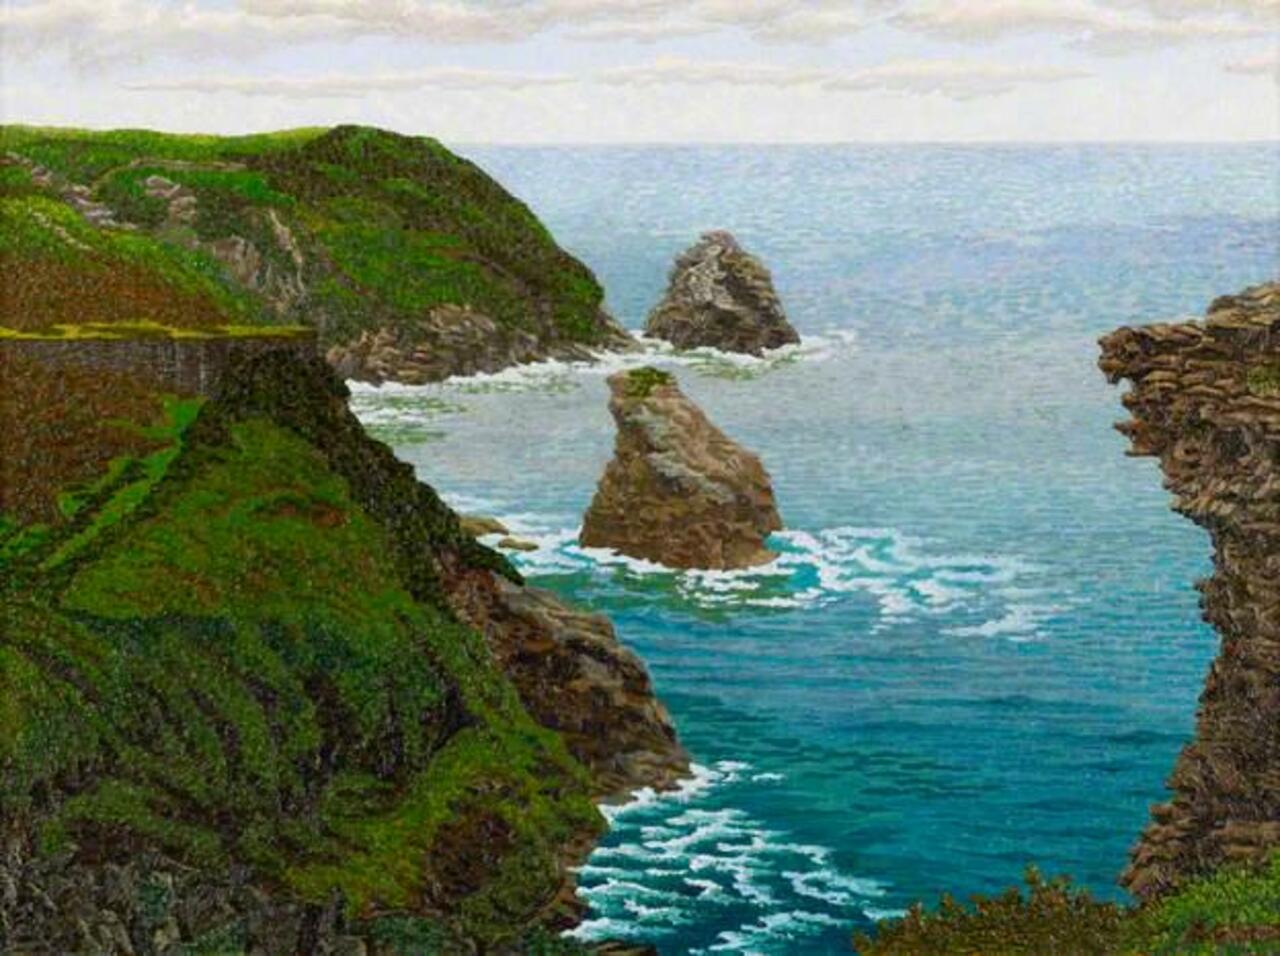 The Kitto Rock, Boscastle, Cornwall,
by Charles Ginner, 1948 #art http://t.co/YrtkOaLMfW